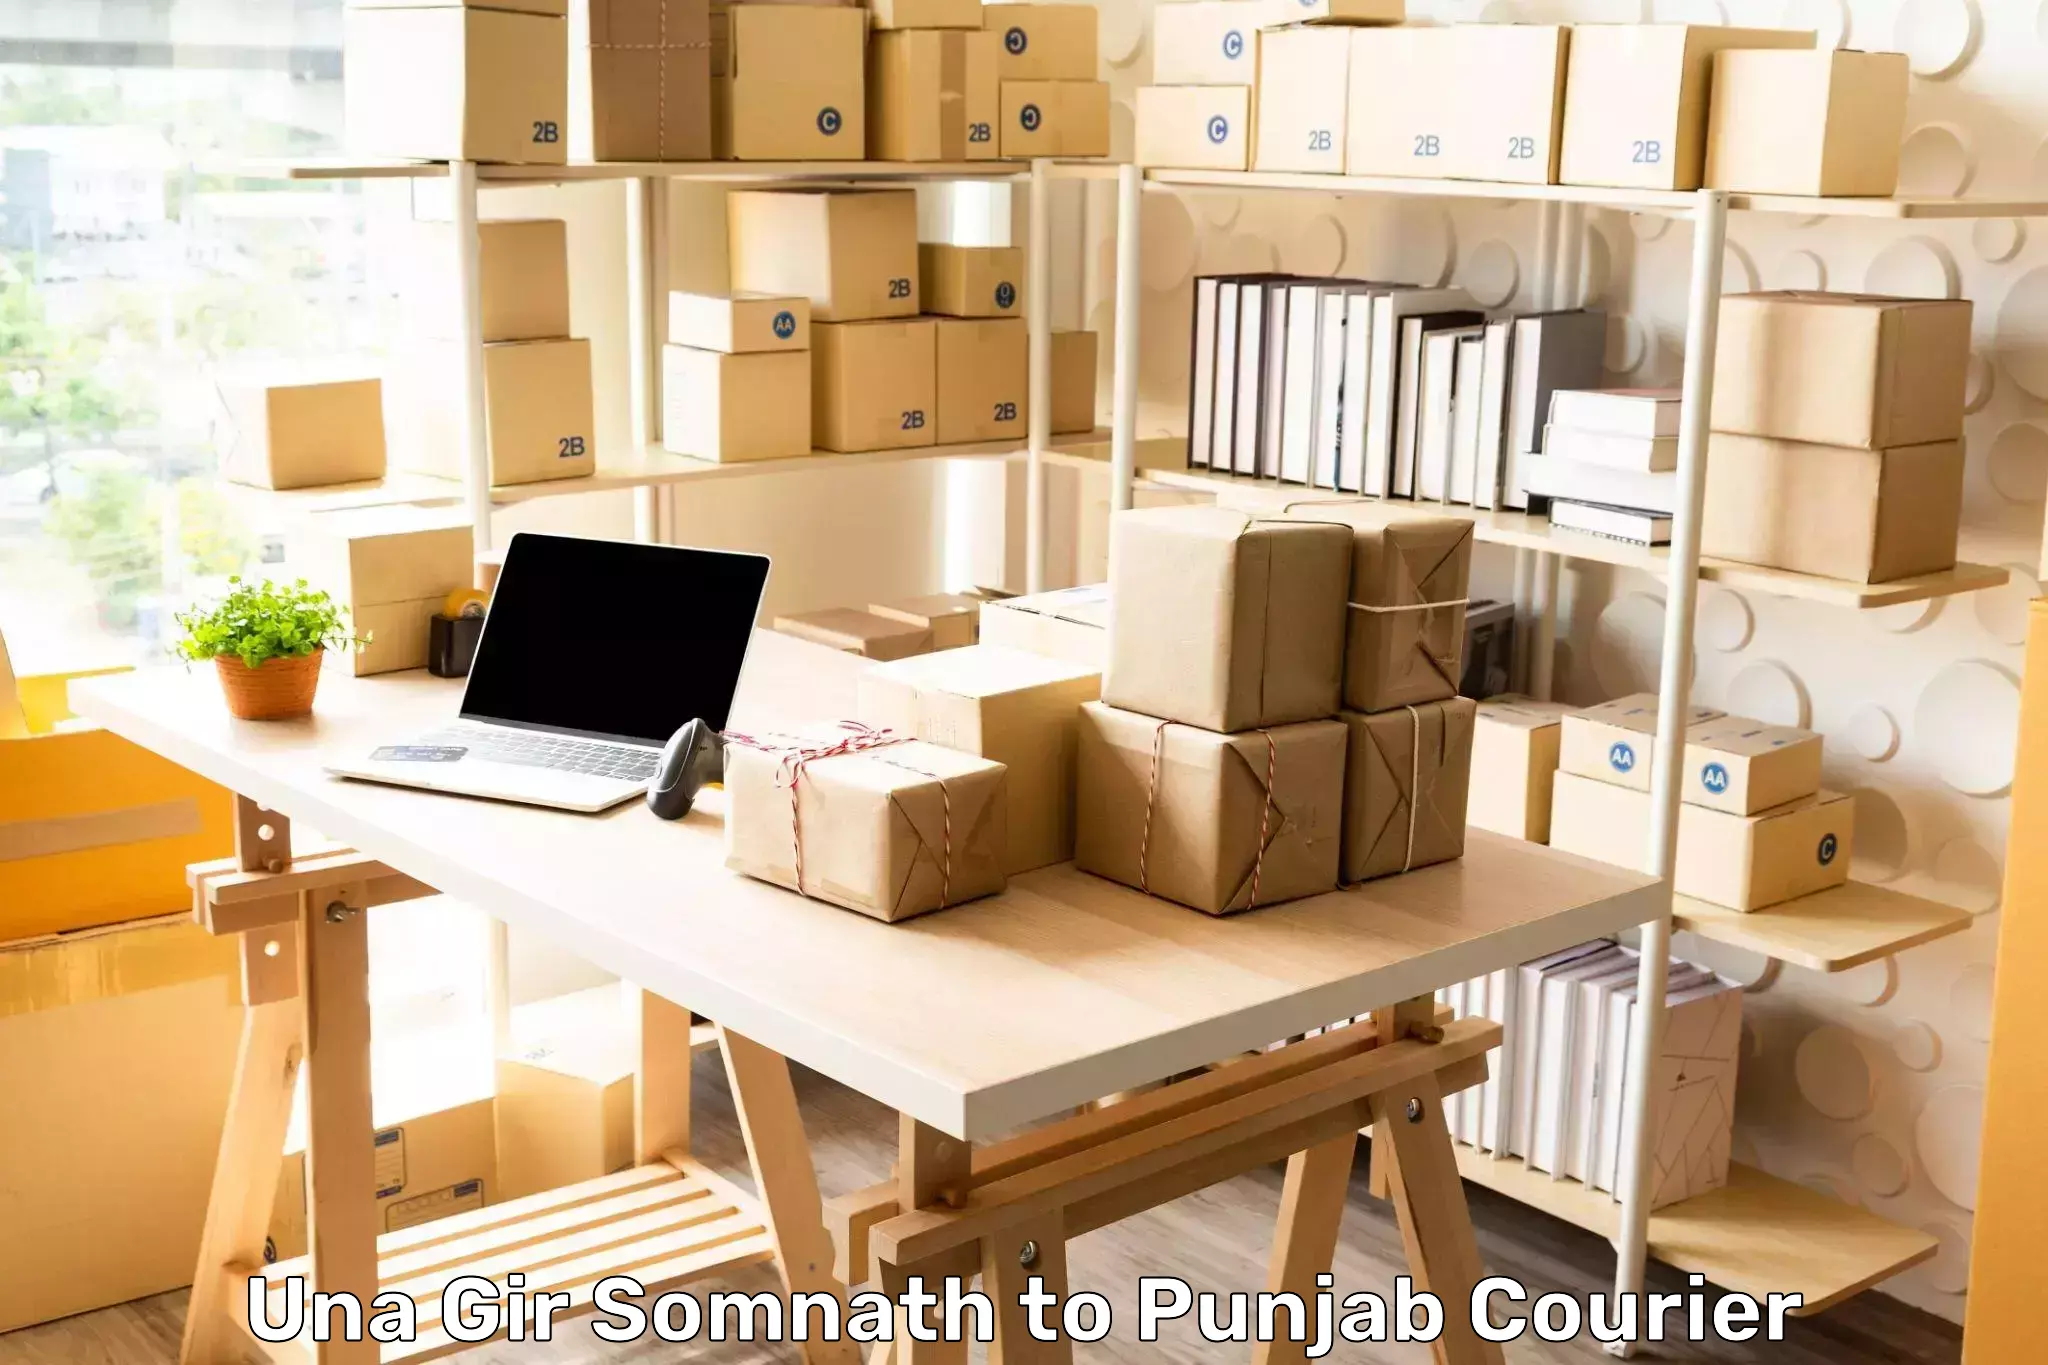 Local courier options Una Gir Somnath to Pathankot